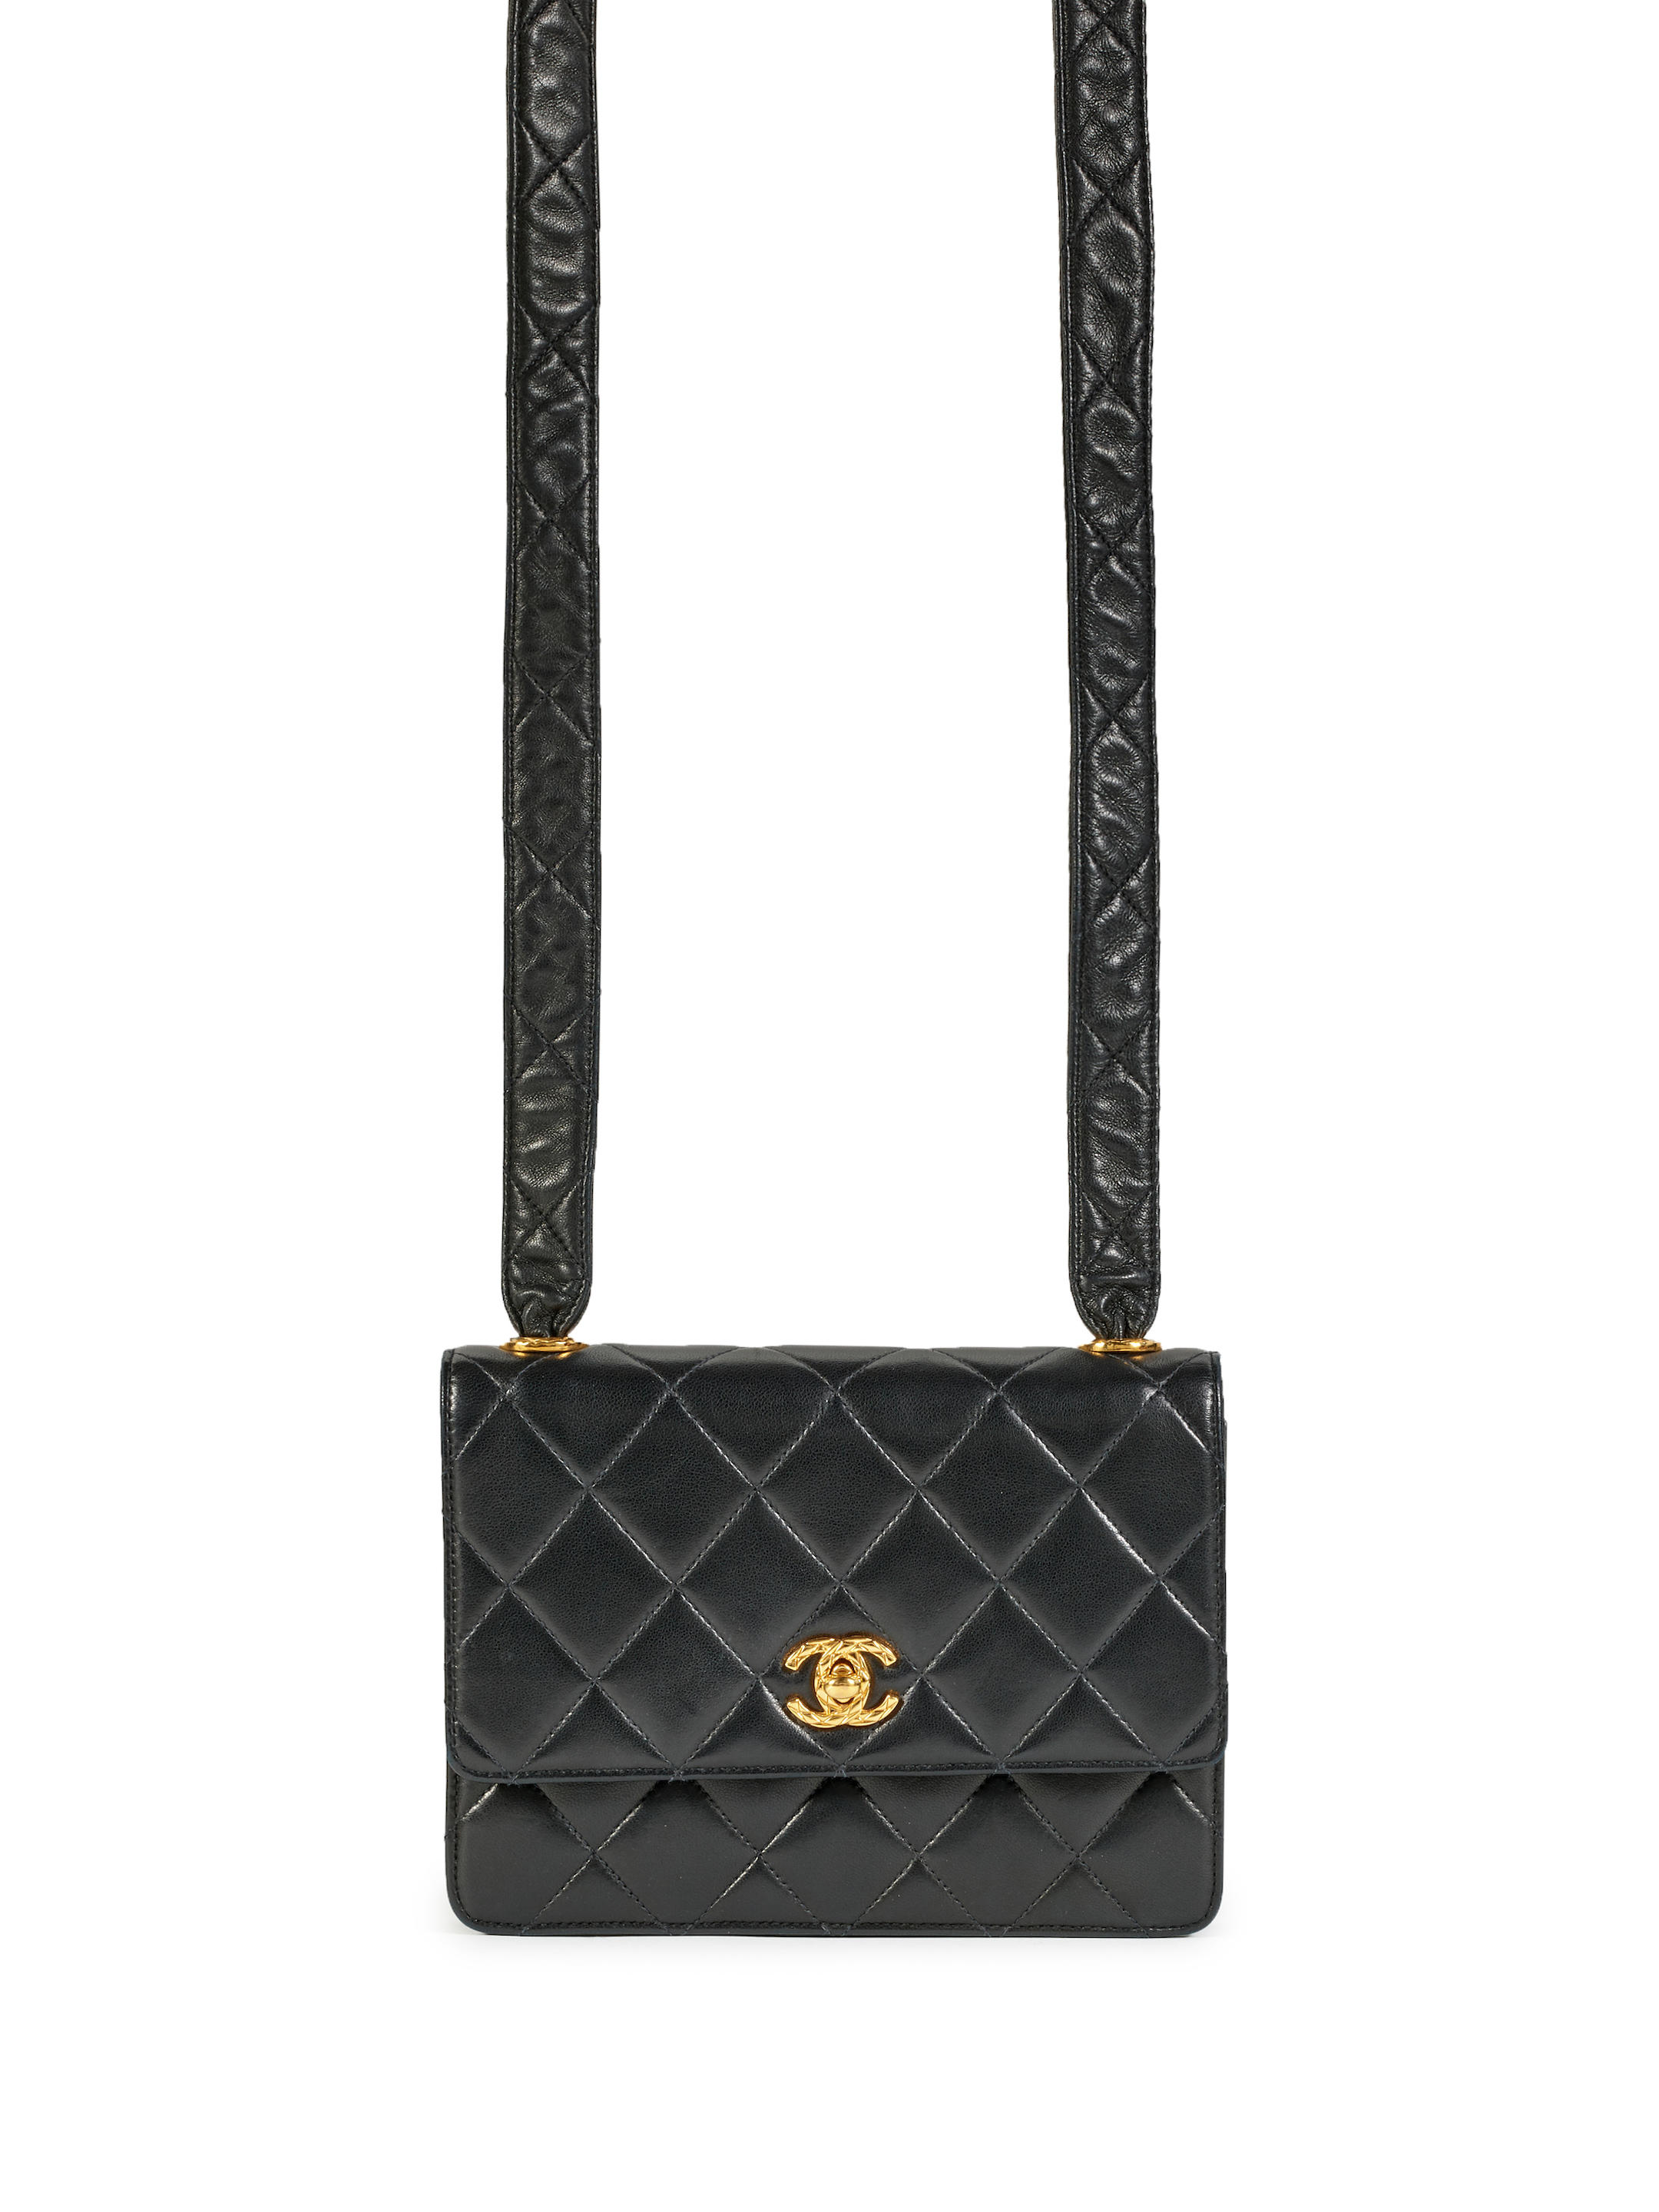 CHANEL BLACK QUILTED LAMBSKIN SHOULDER BAG WITH LEATHER STRAPS (includes  authenticity card, original dust bag) - Bonhams